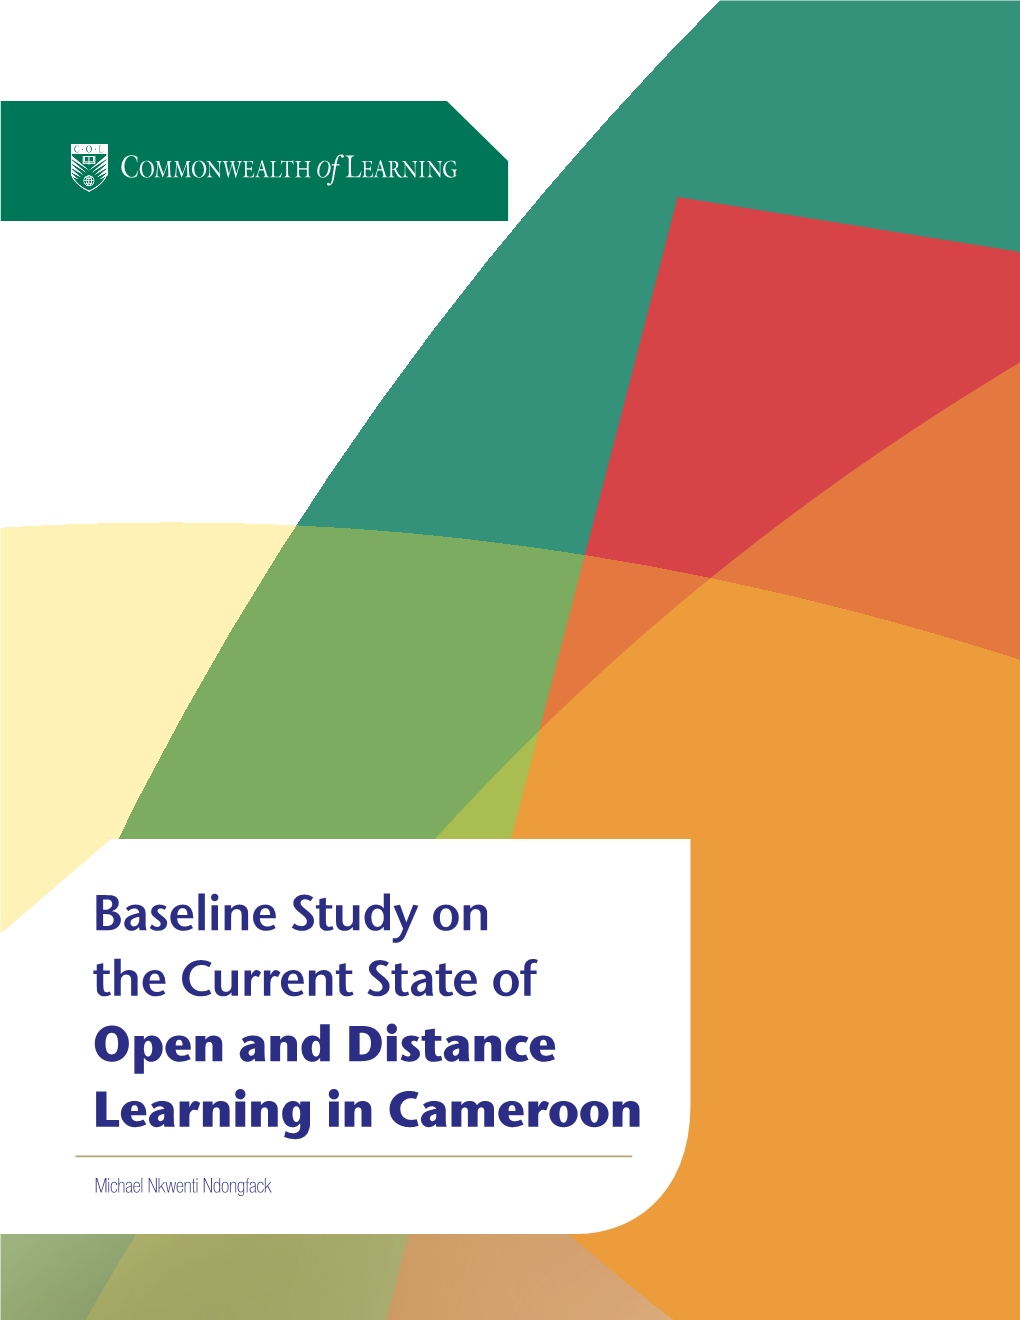 Baseline Study on the Current State of Open and Distance Learning in Cameroon